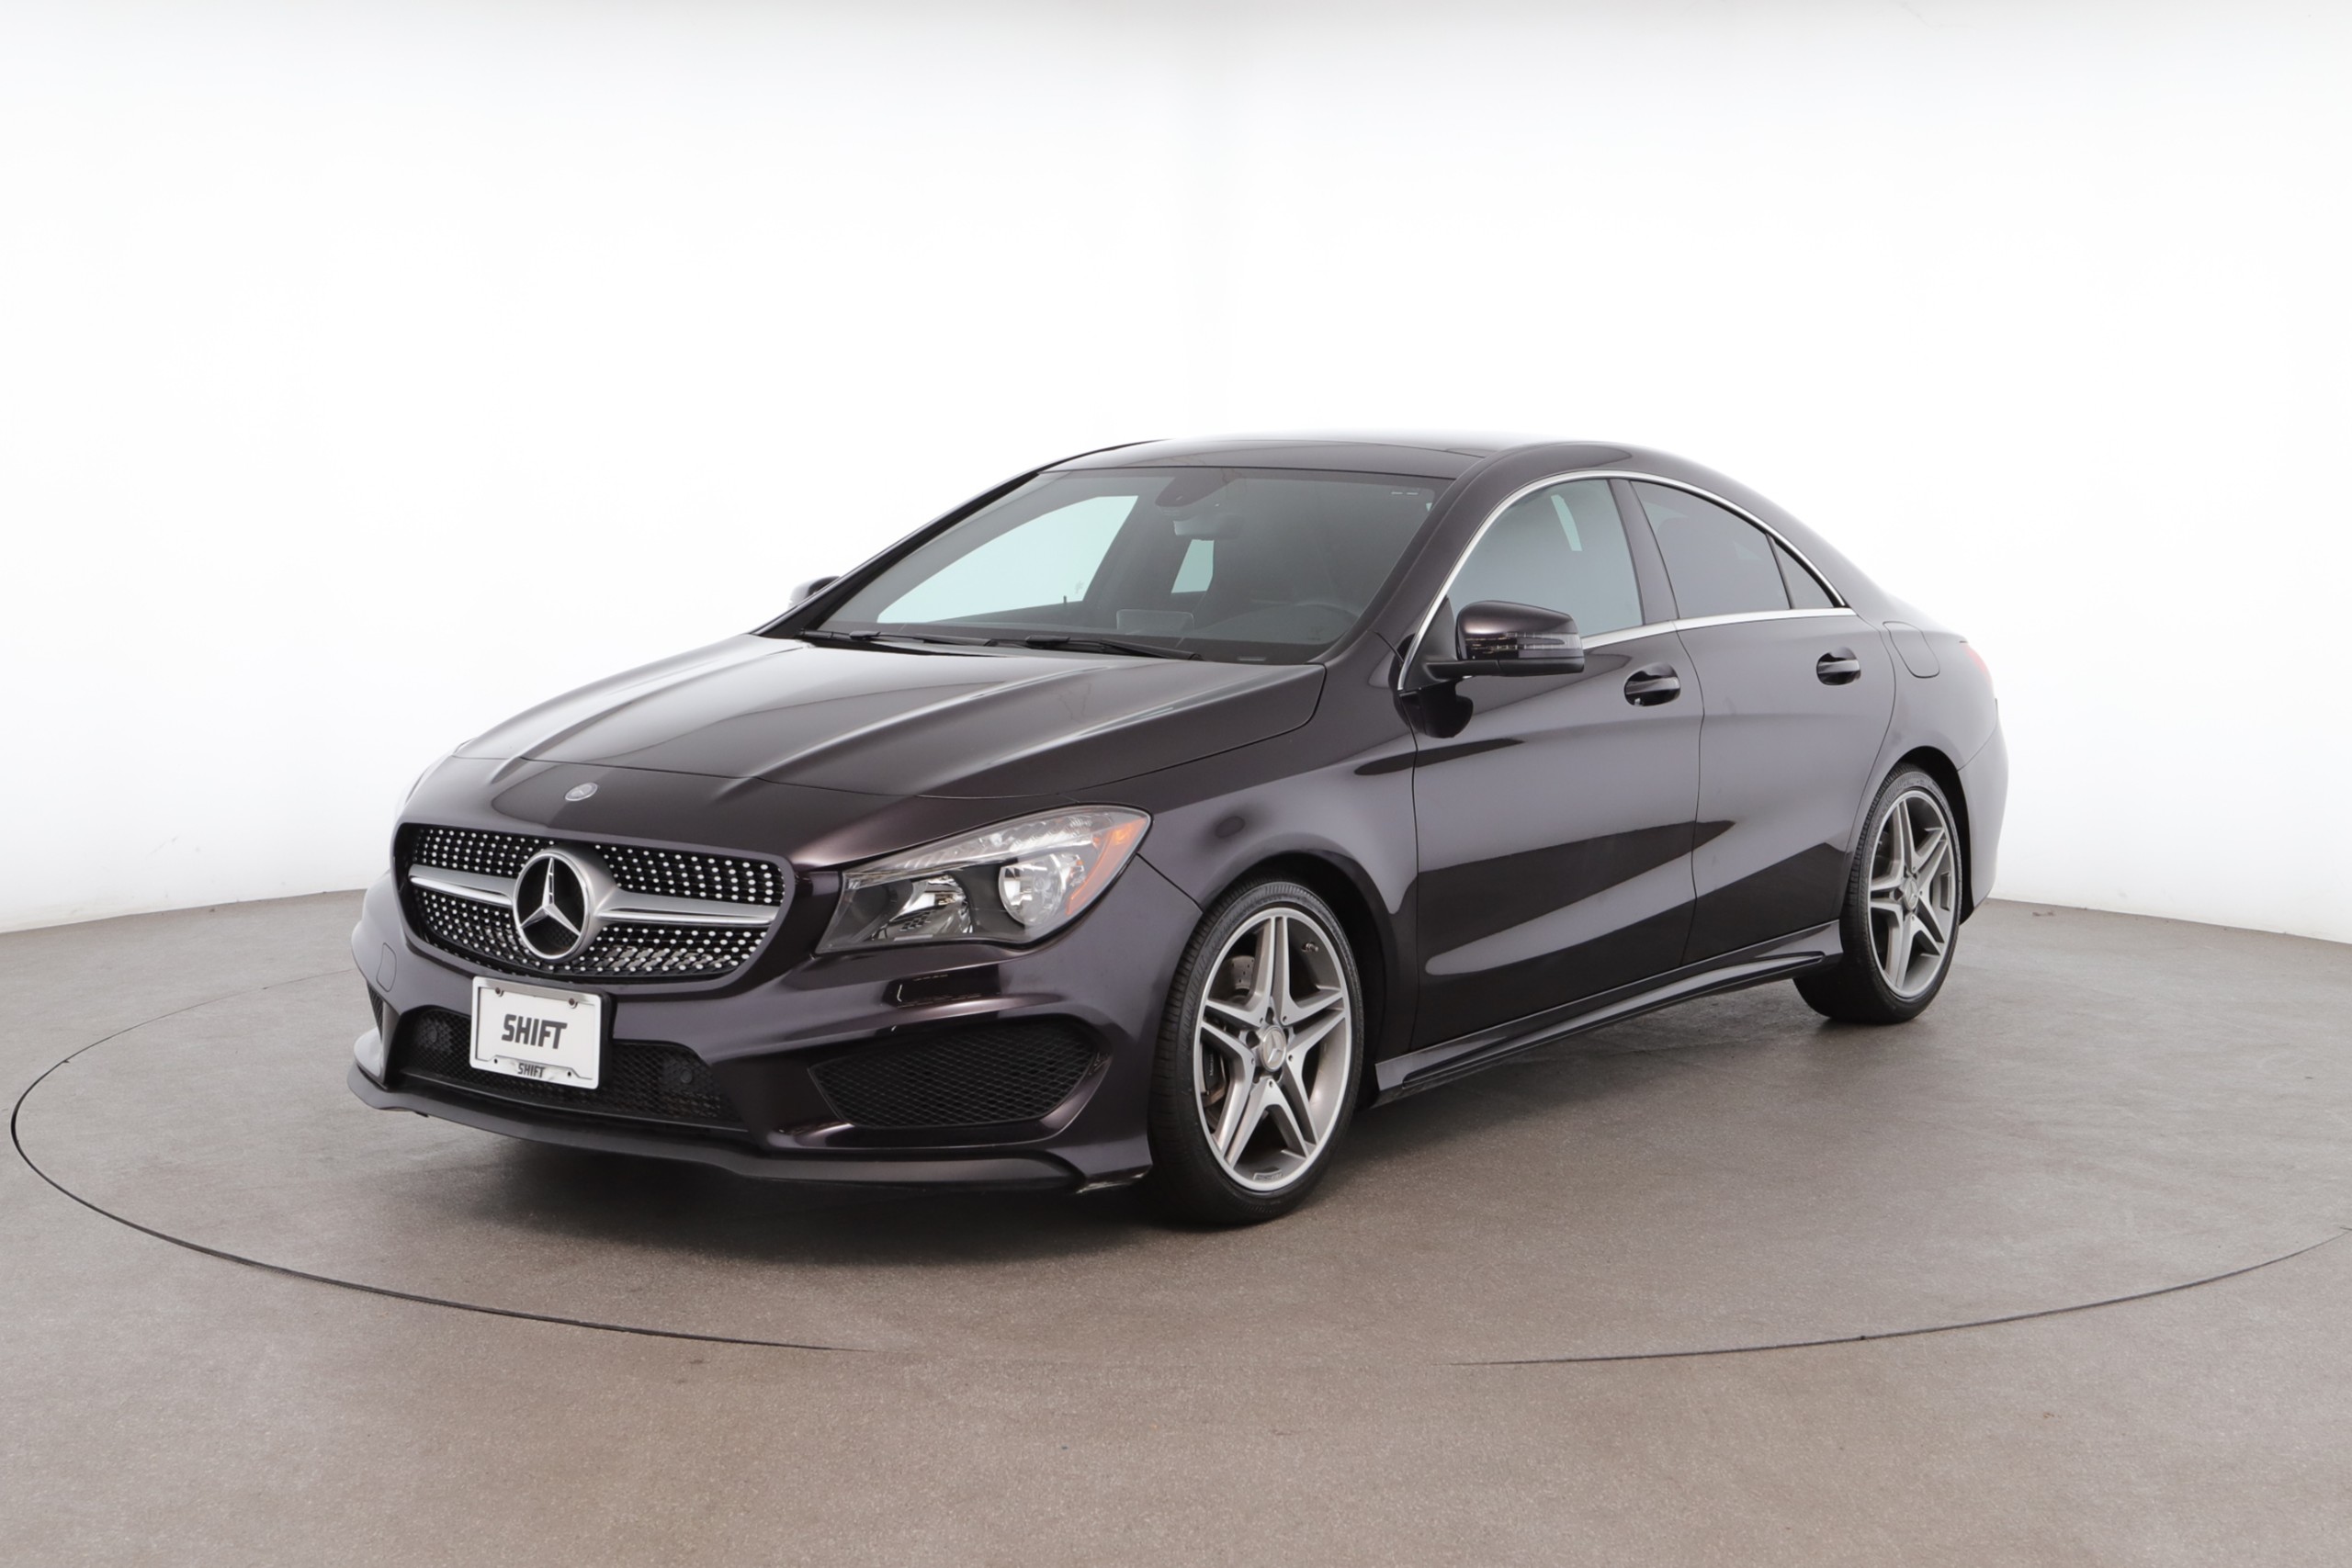 Mercedes-Benz CLA 250 Review: Pricing, Specs & More | Shift